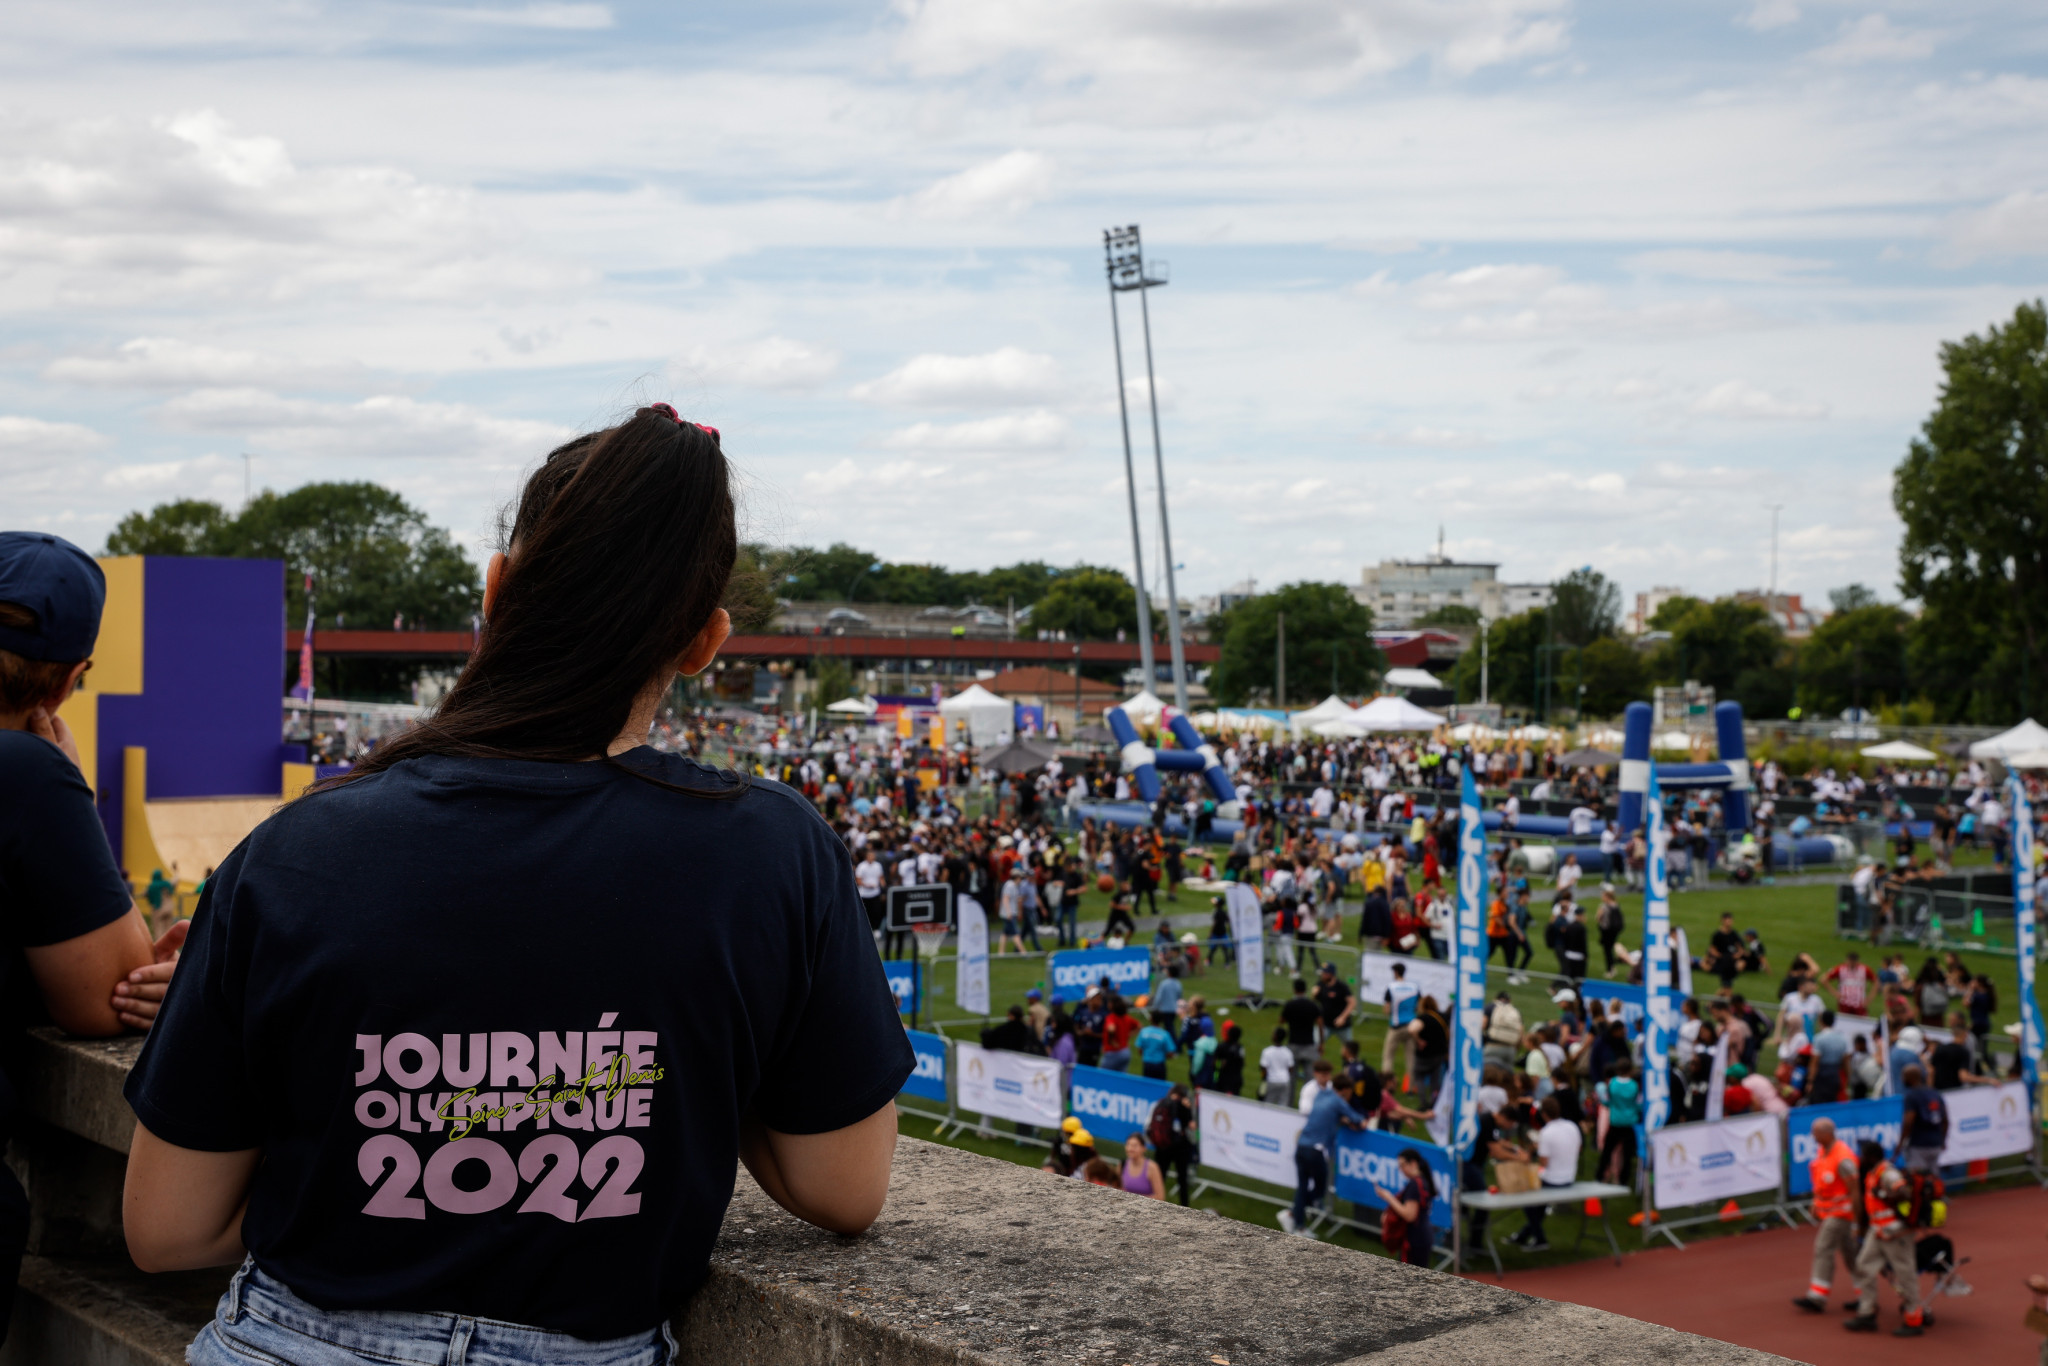 Paris 2024 bring thousands to Stade de France for Olympic Day event